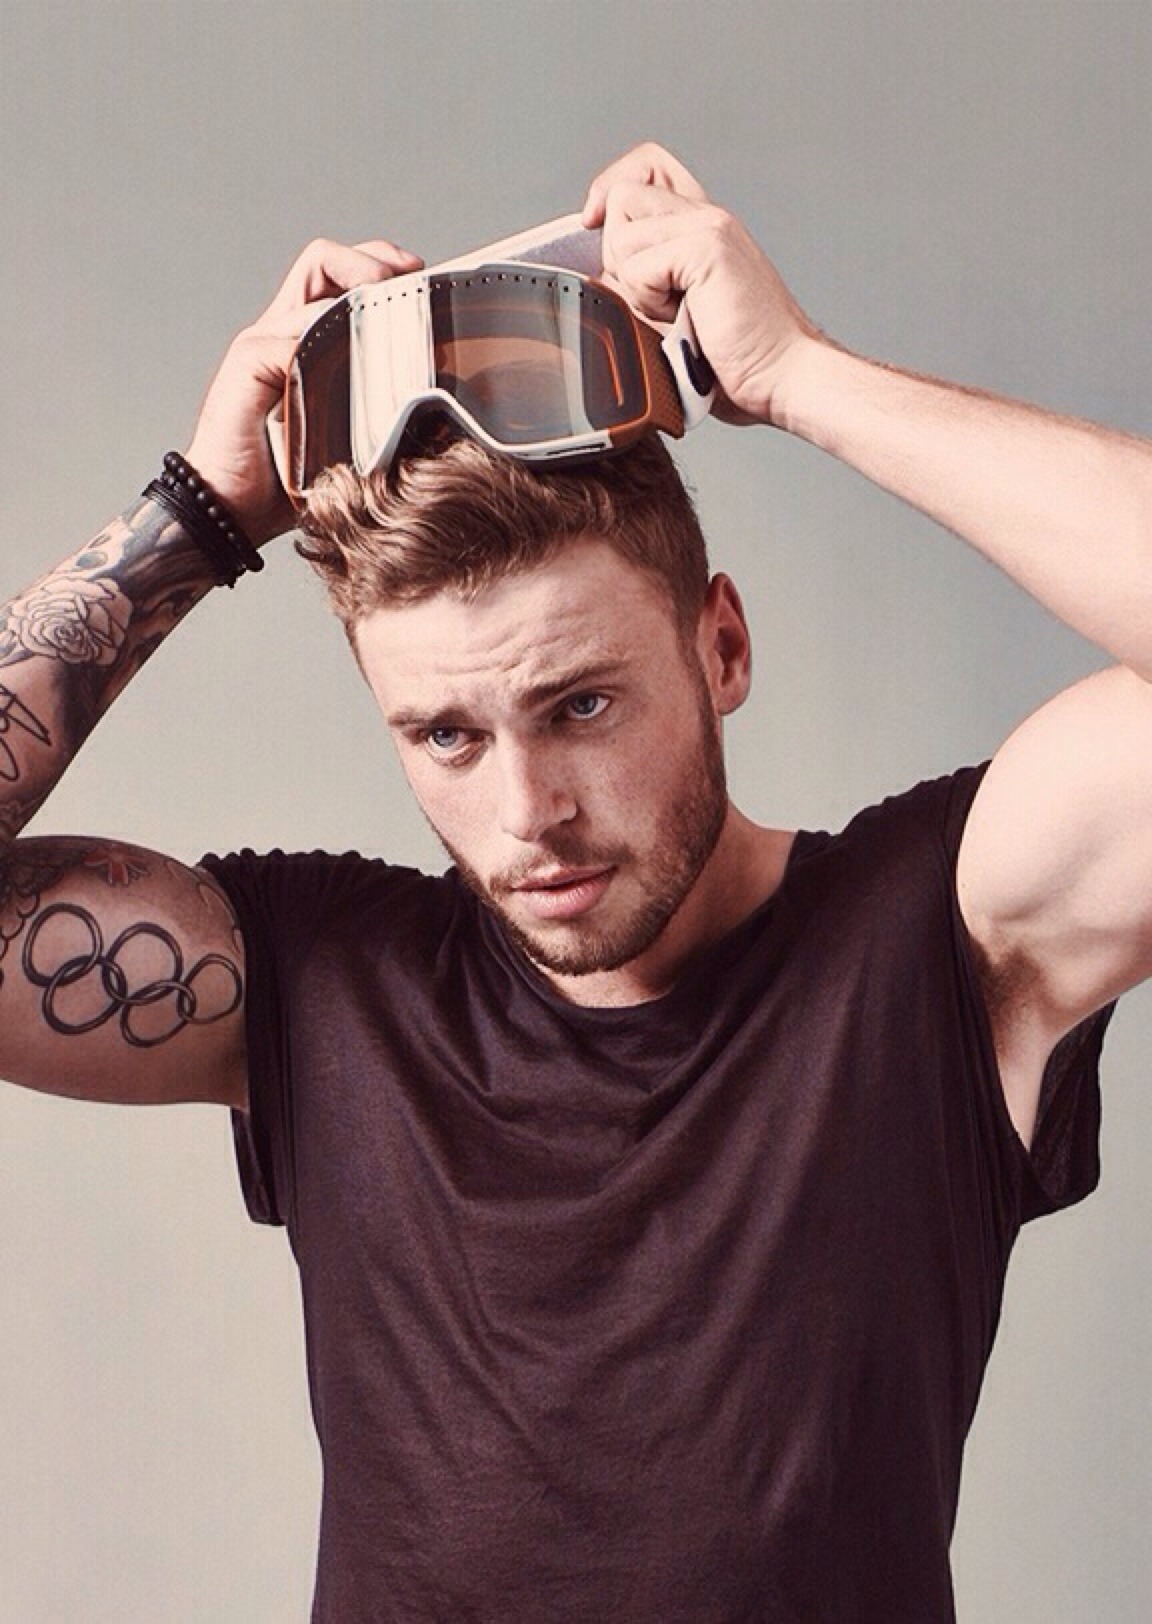 queer-cloud:   Gus Kenworthy becomes first openly gay action sports athlete “I